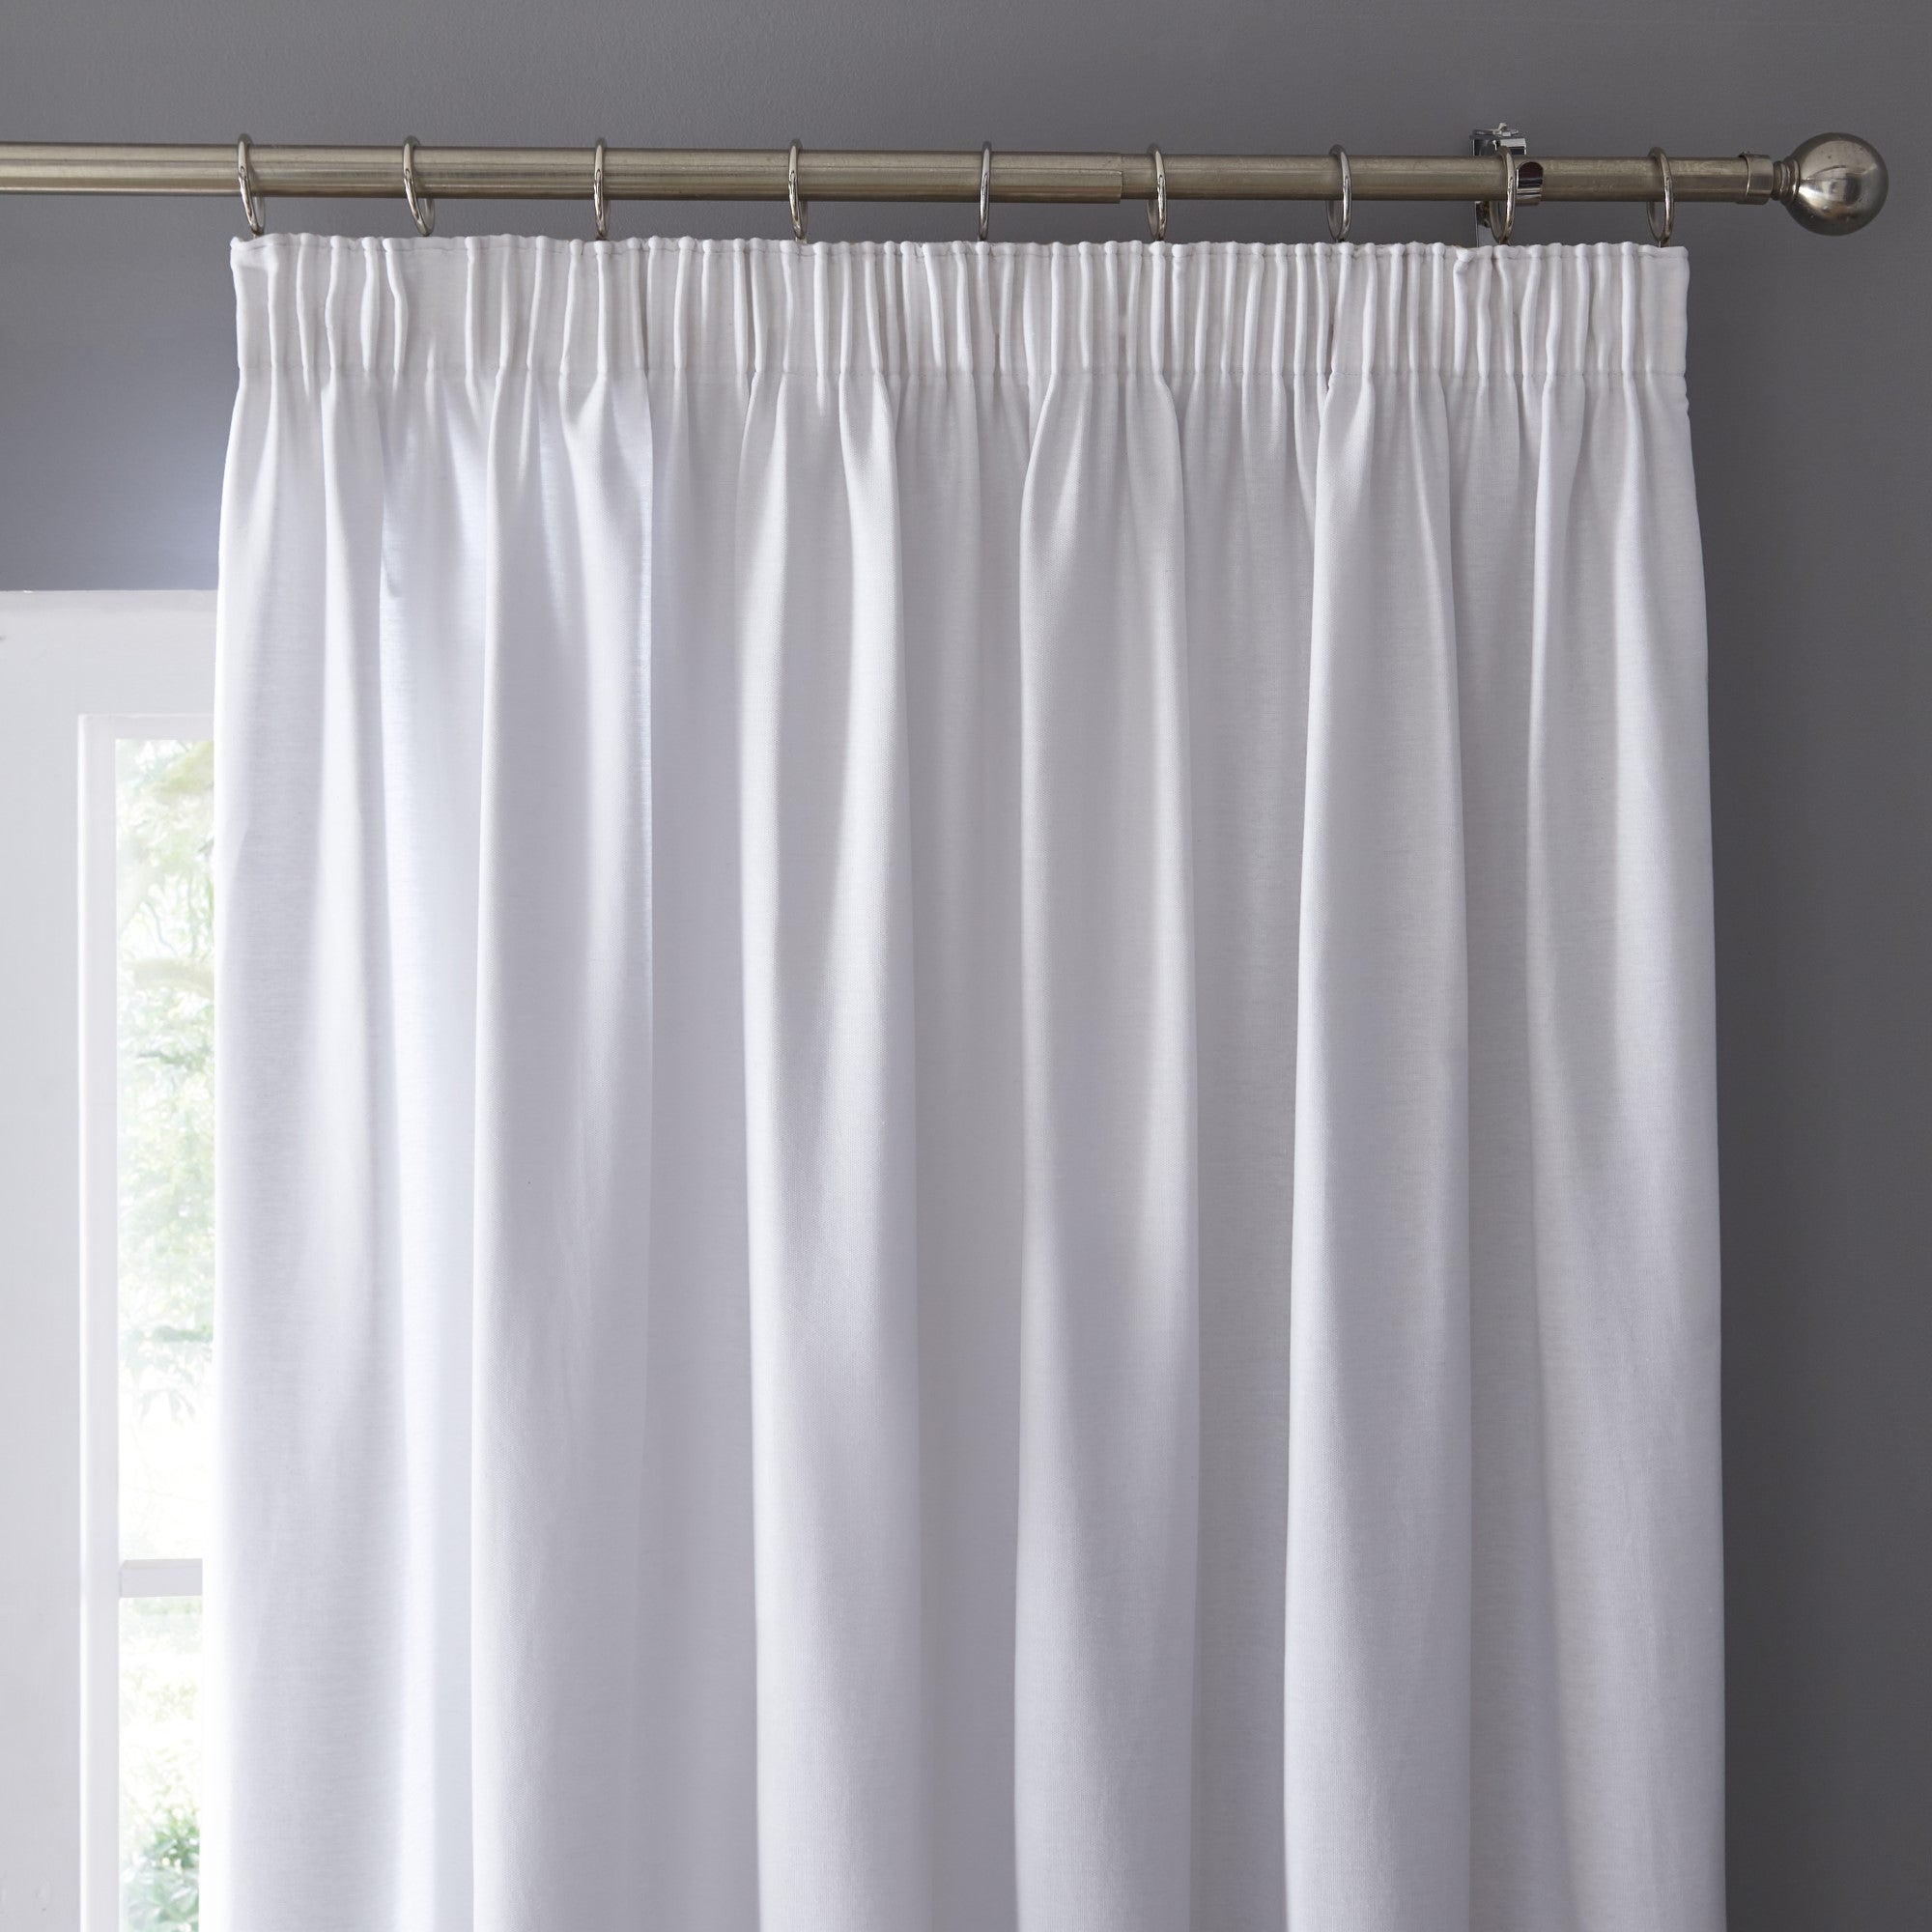 Pair of Pencil Pleat Curtains Dijon by Fusion in White